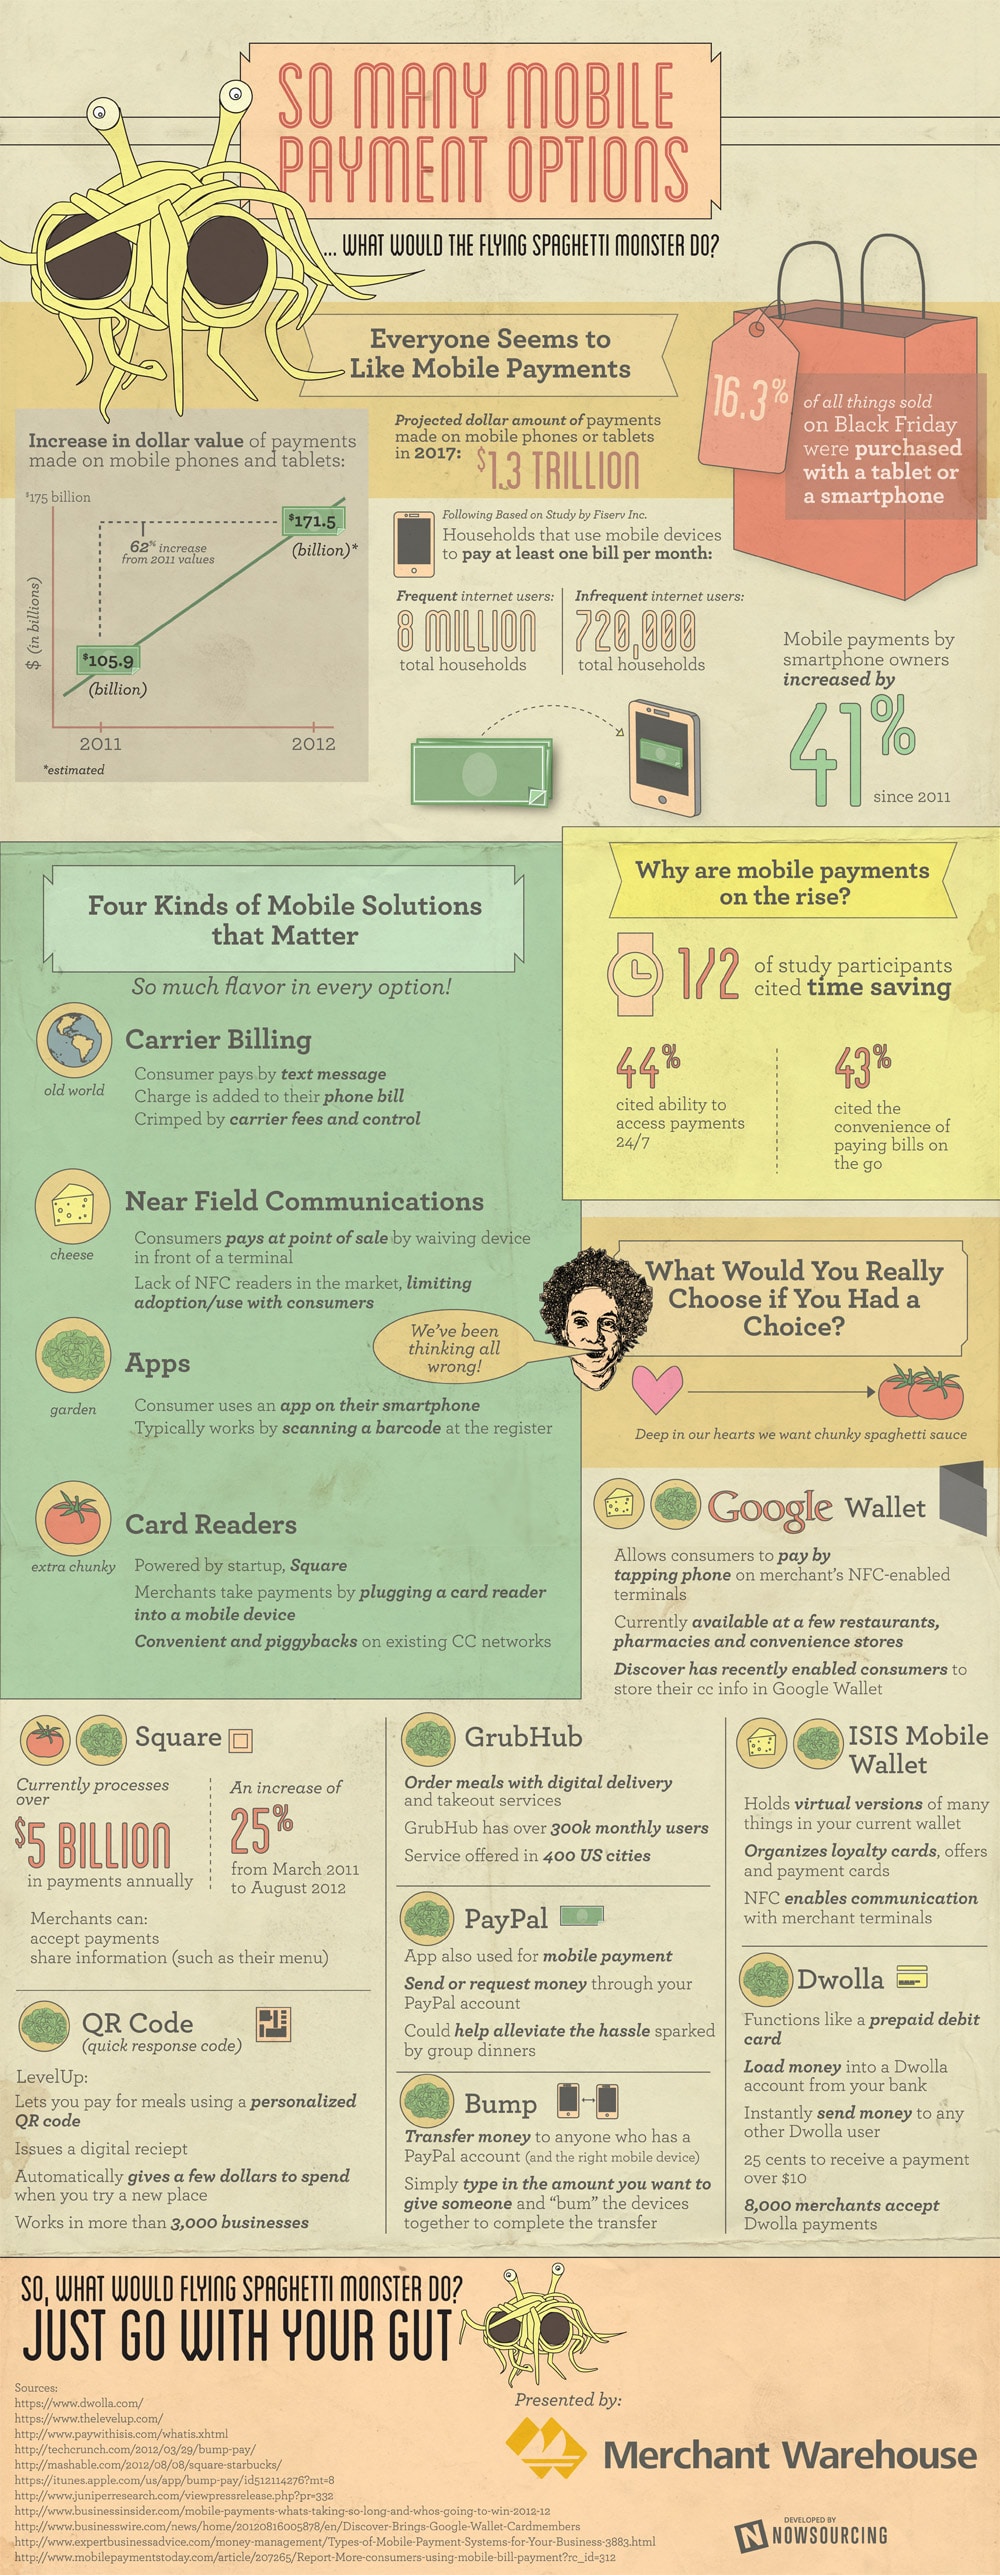 mobile-payment-options-puchases-infographic